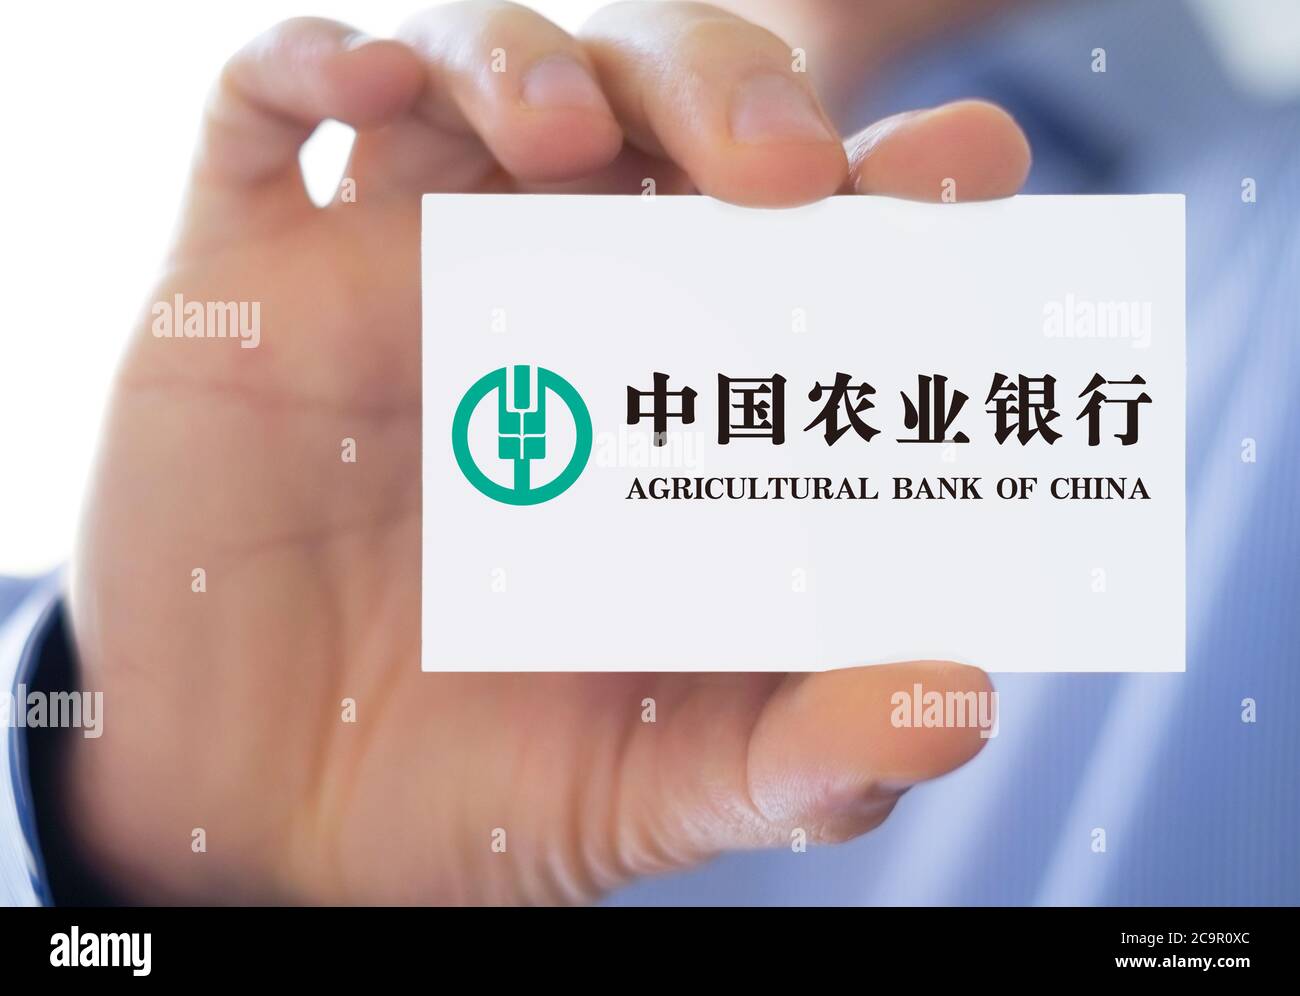 Agricultural Bank of China ABC icon logo Stock Photo